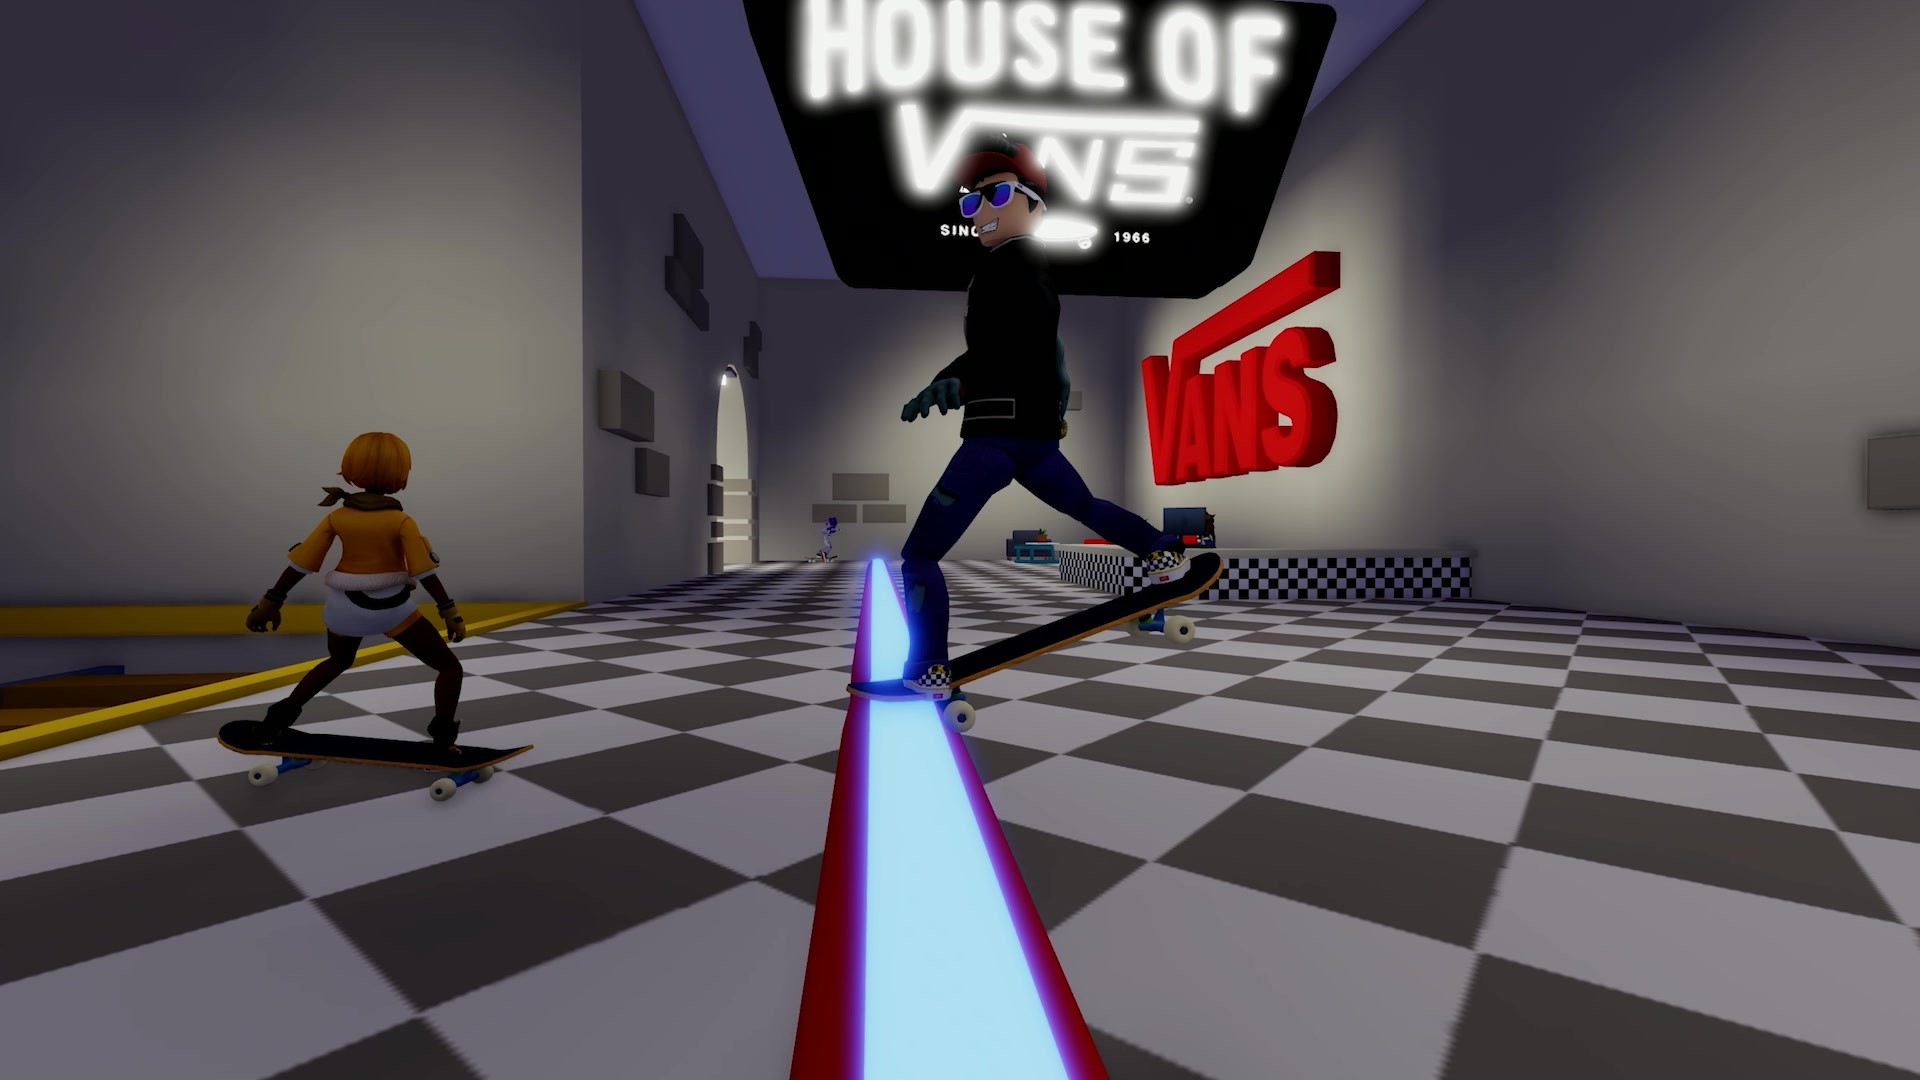 Vans World Experience on Roblox